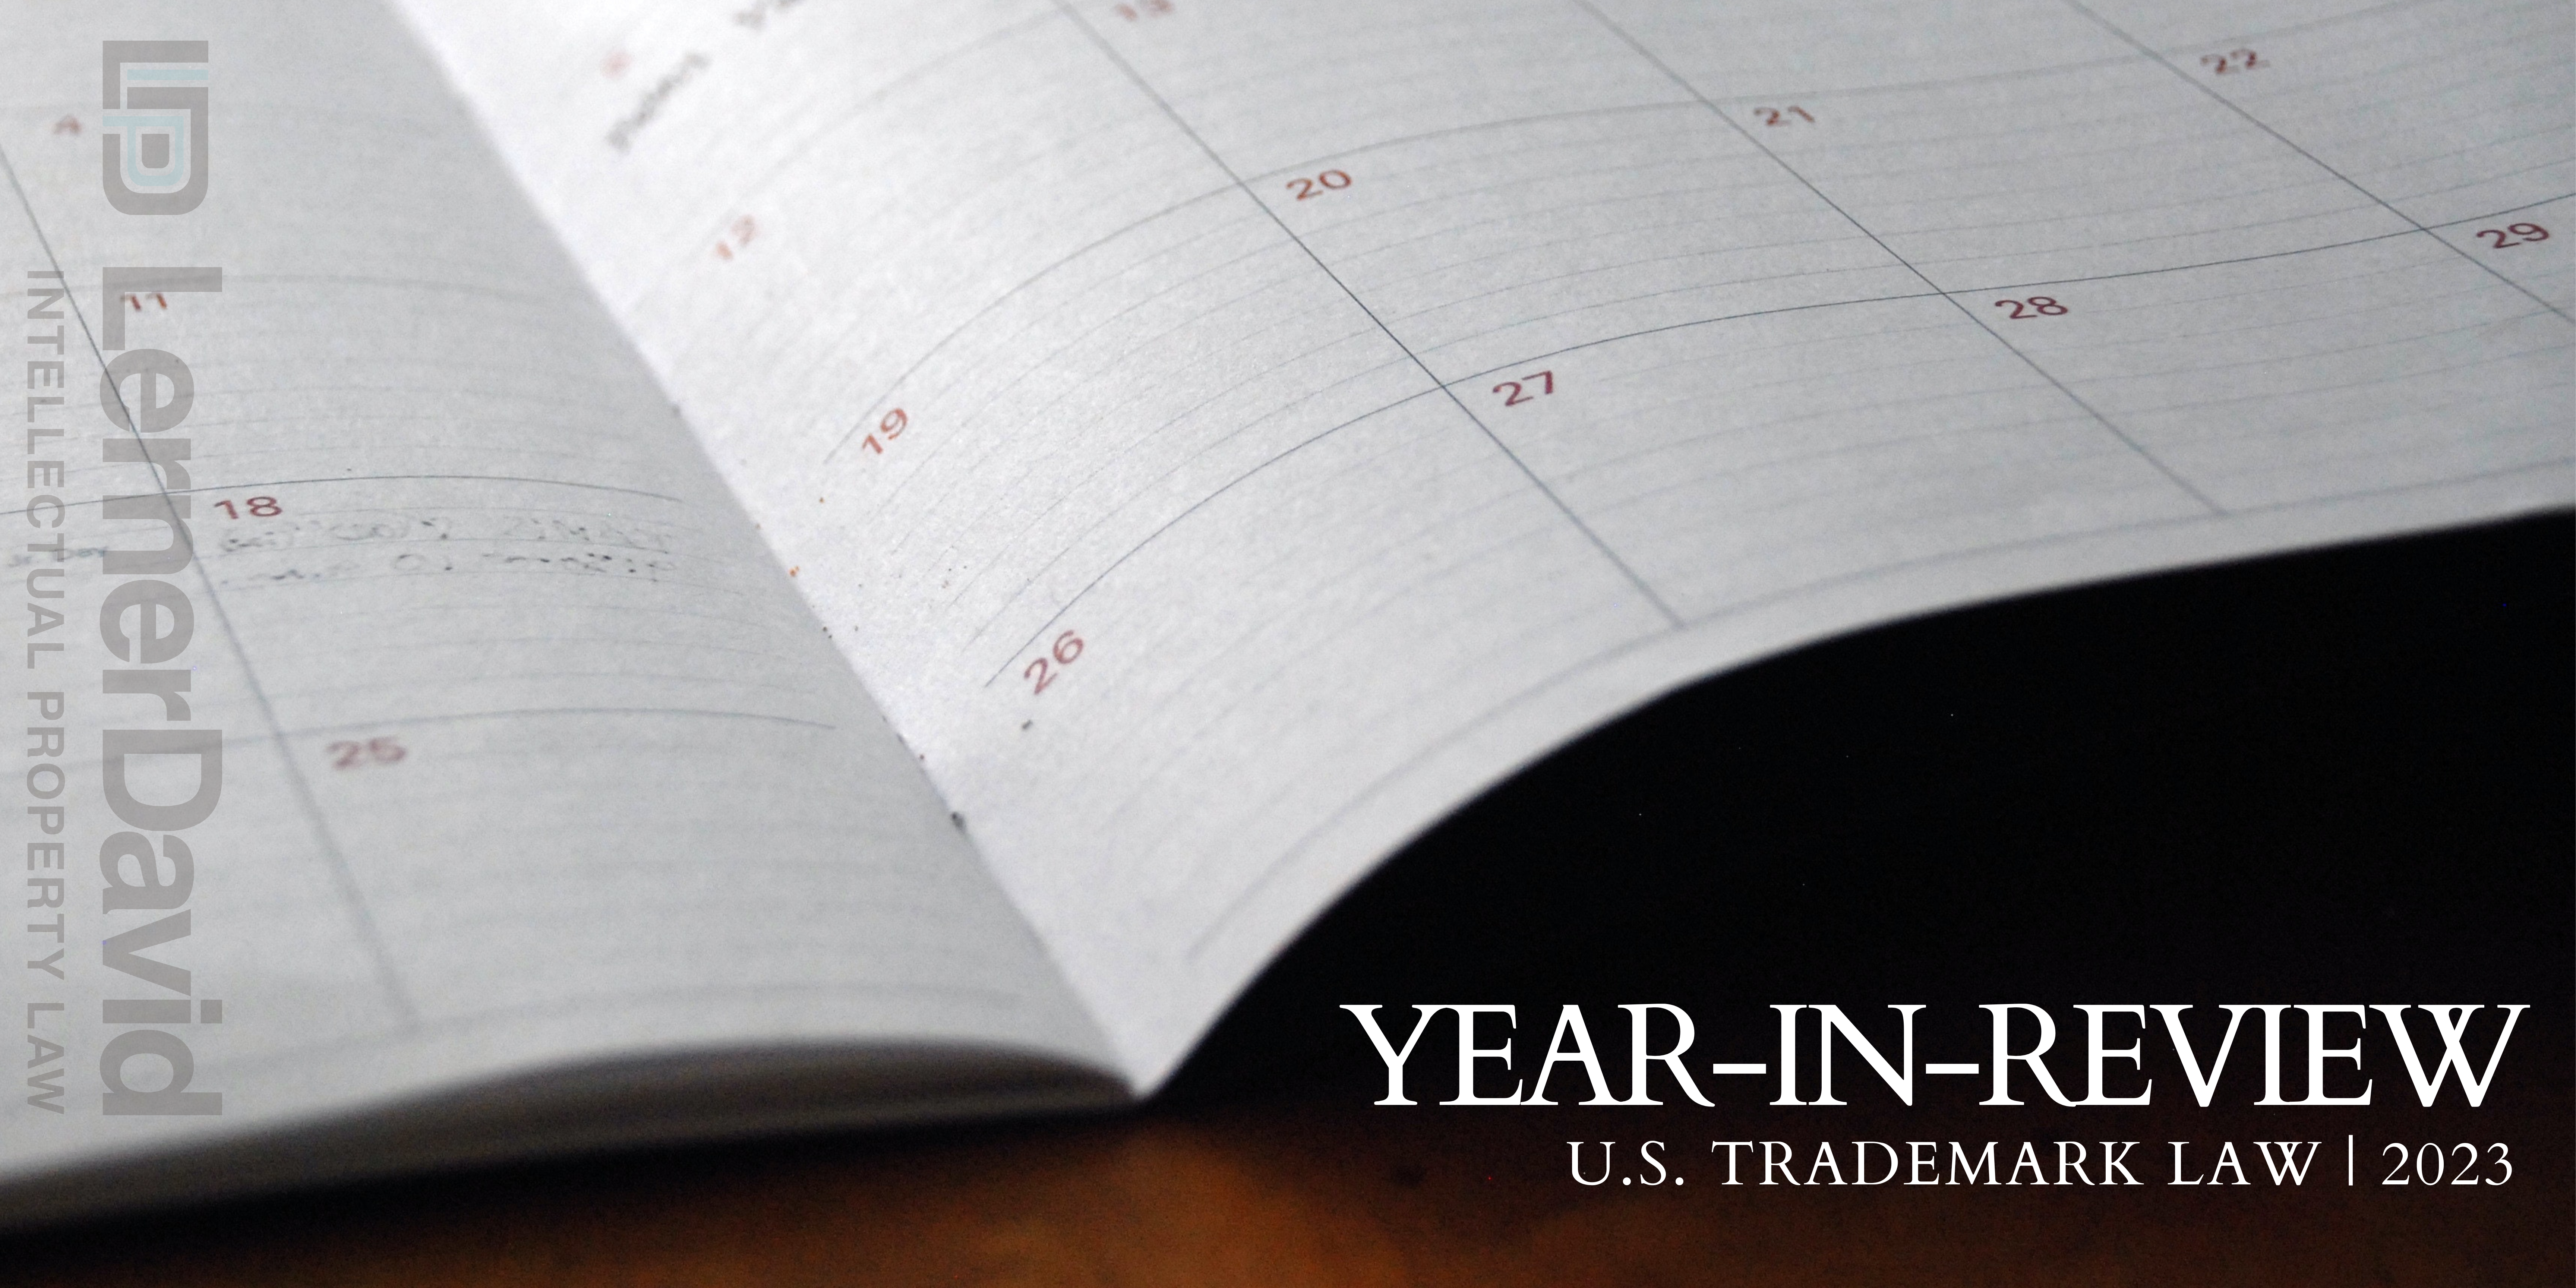 Year-In-Review U.S. Trademark Law